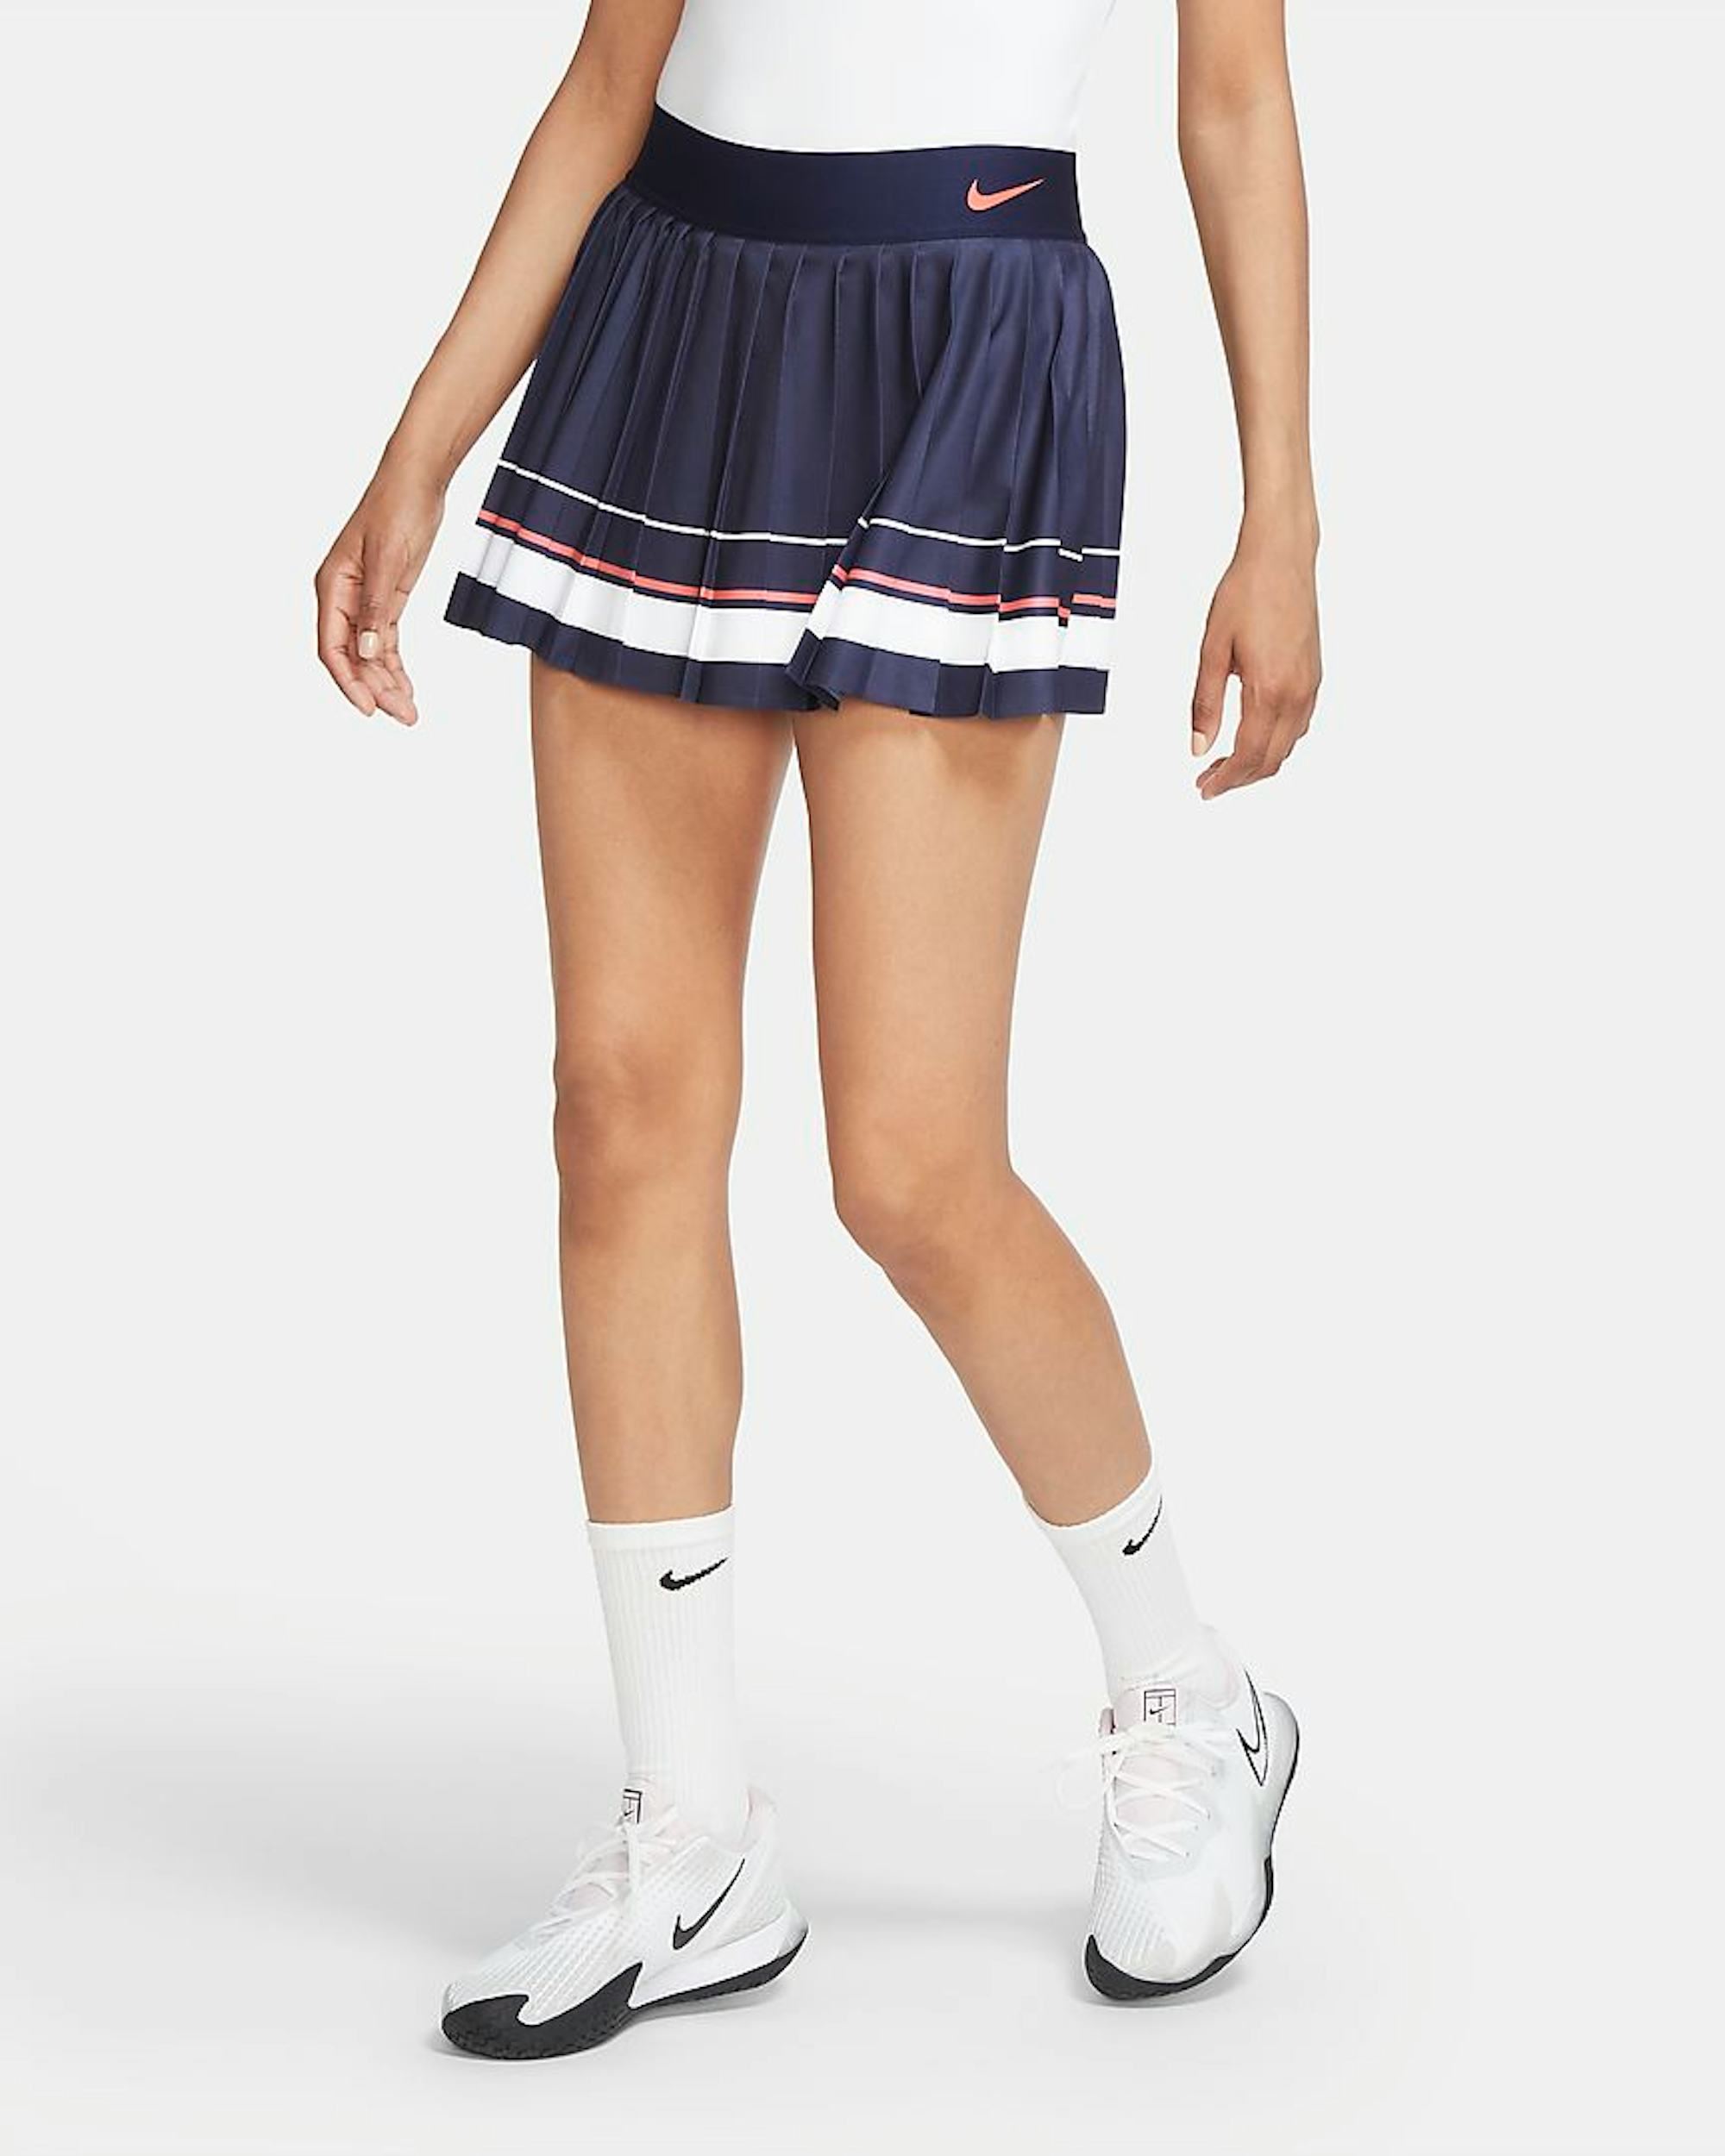 16 Tennis & Pleated Mini Skirts For Your Summer 2020 Wardrobe